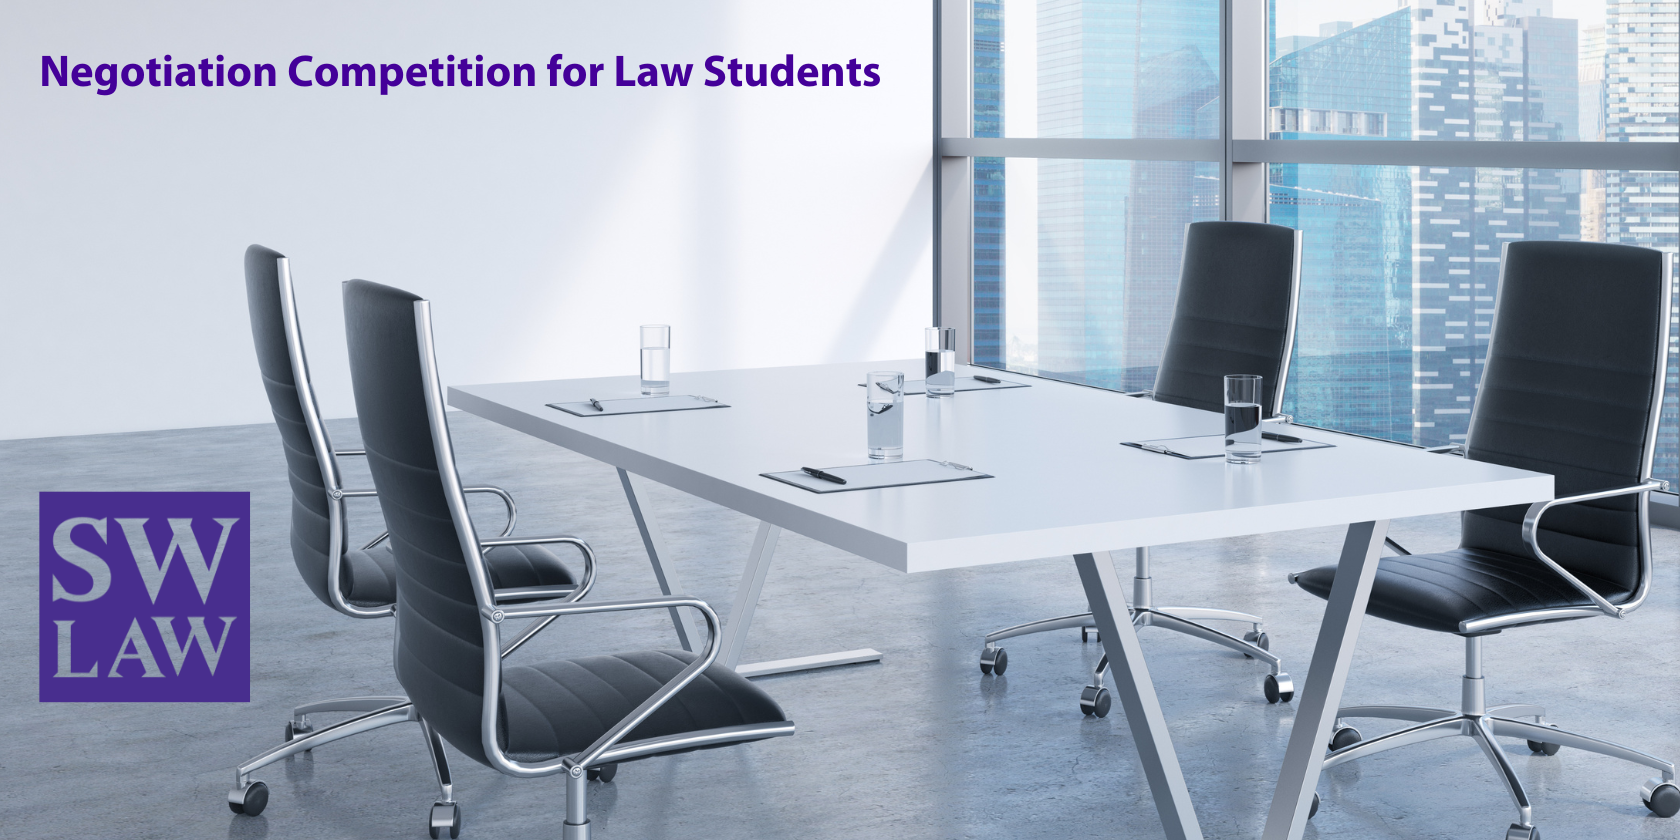 Negotiation Competition for Law Students with image of desk with four chairs